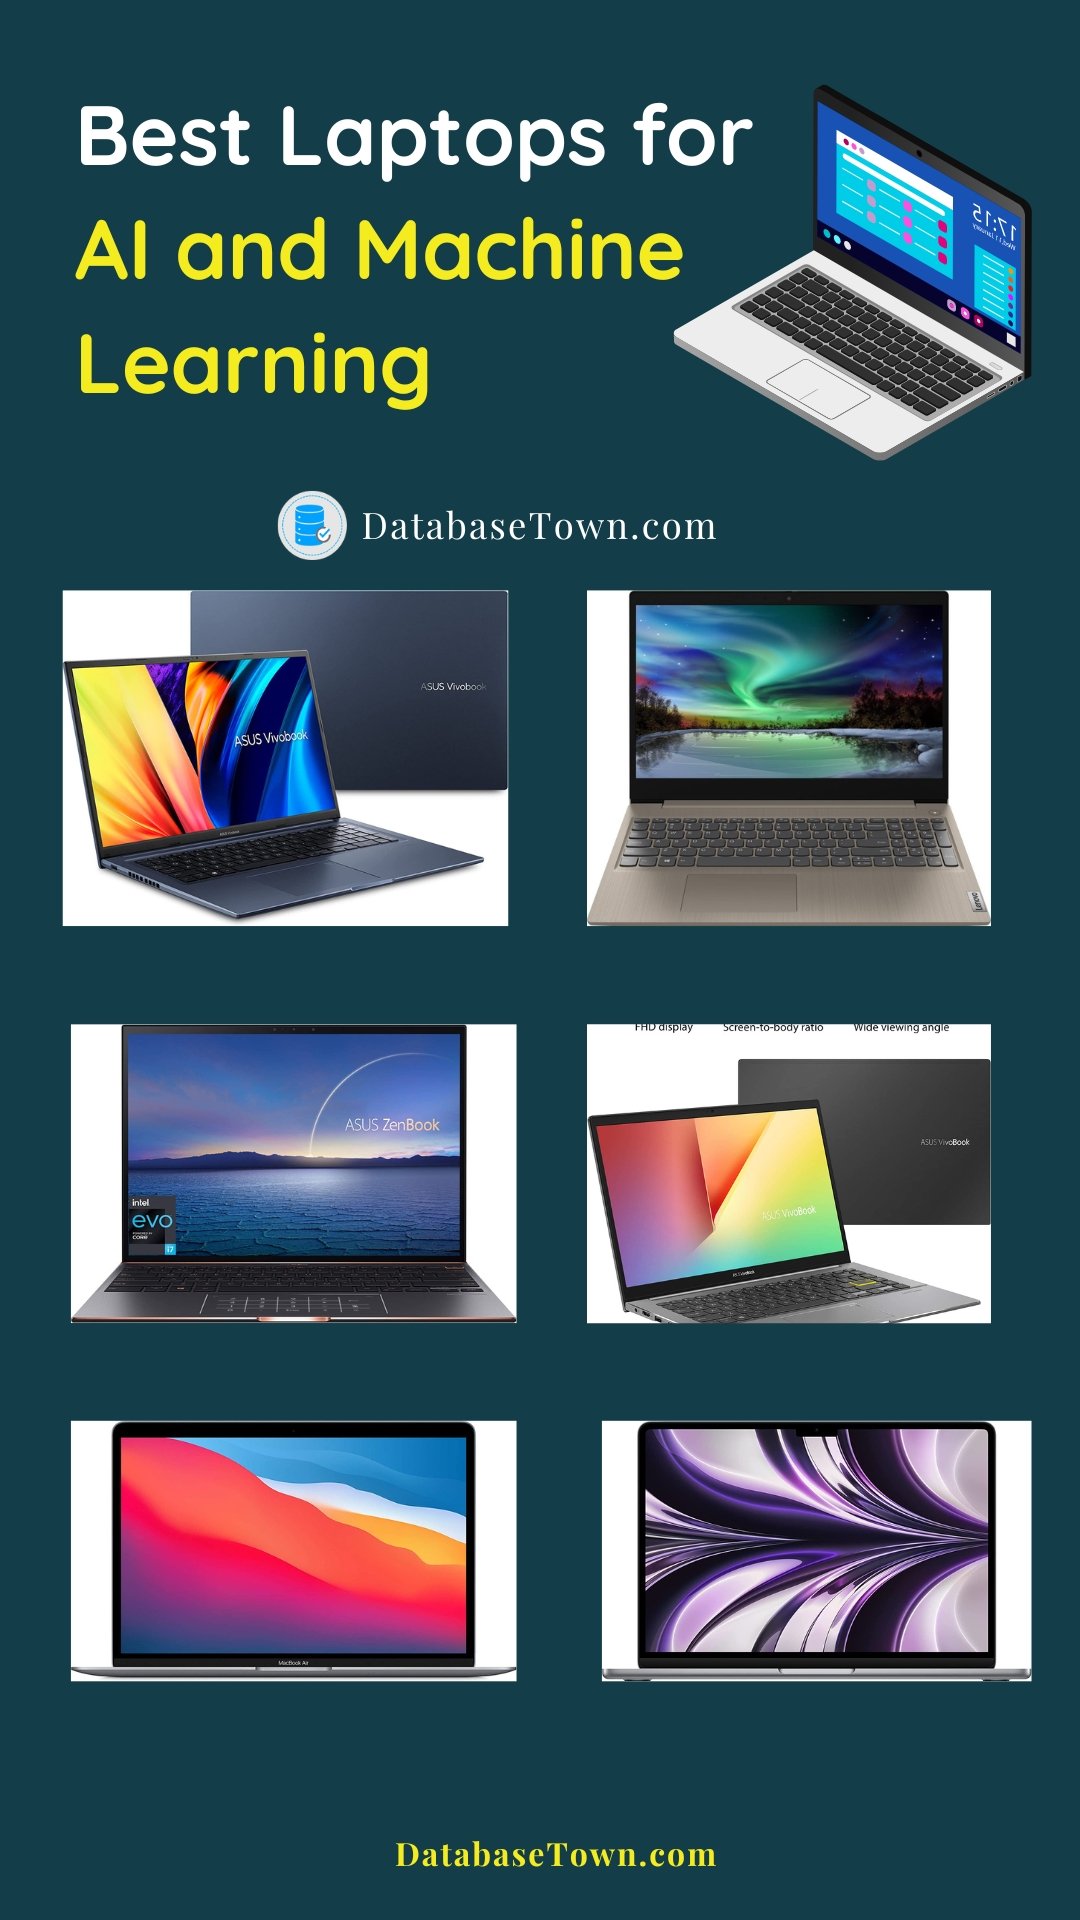 Best Laptops for AI and Machine Learning